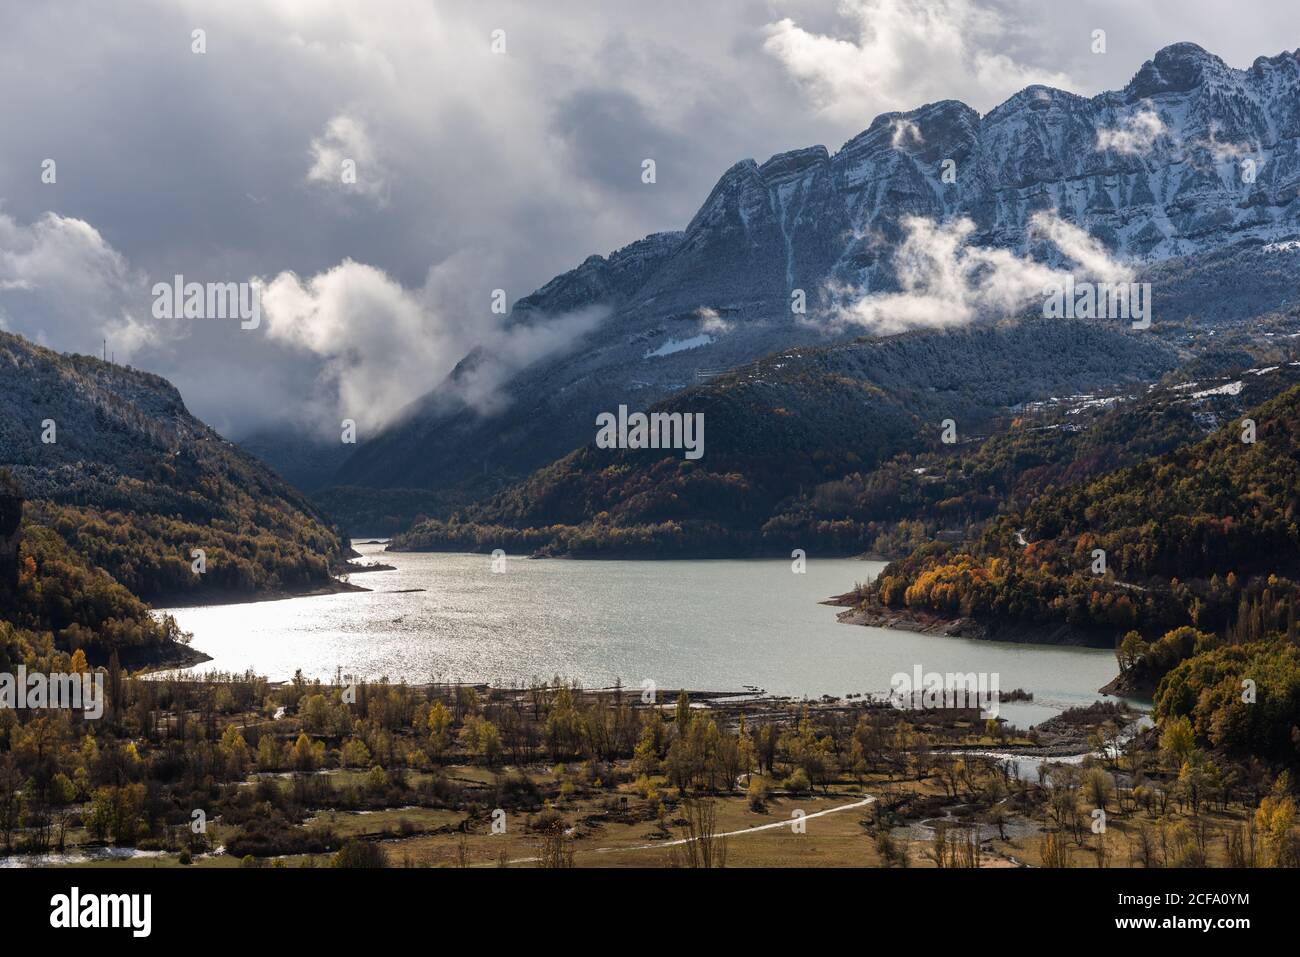 Lake close to snowy mountain ridge and cloudy sky in a landscape autumn Stock Photo